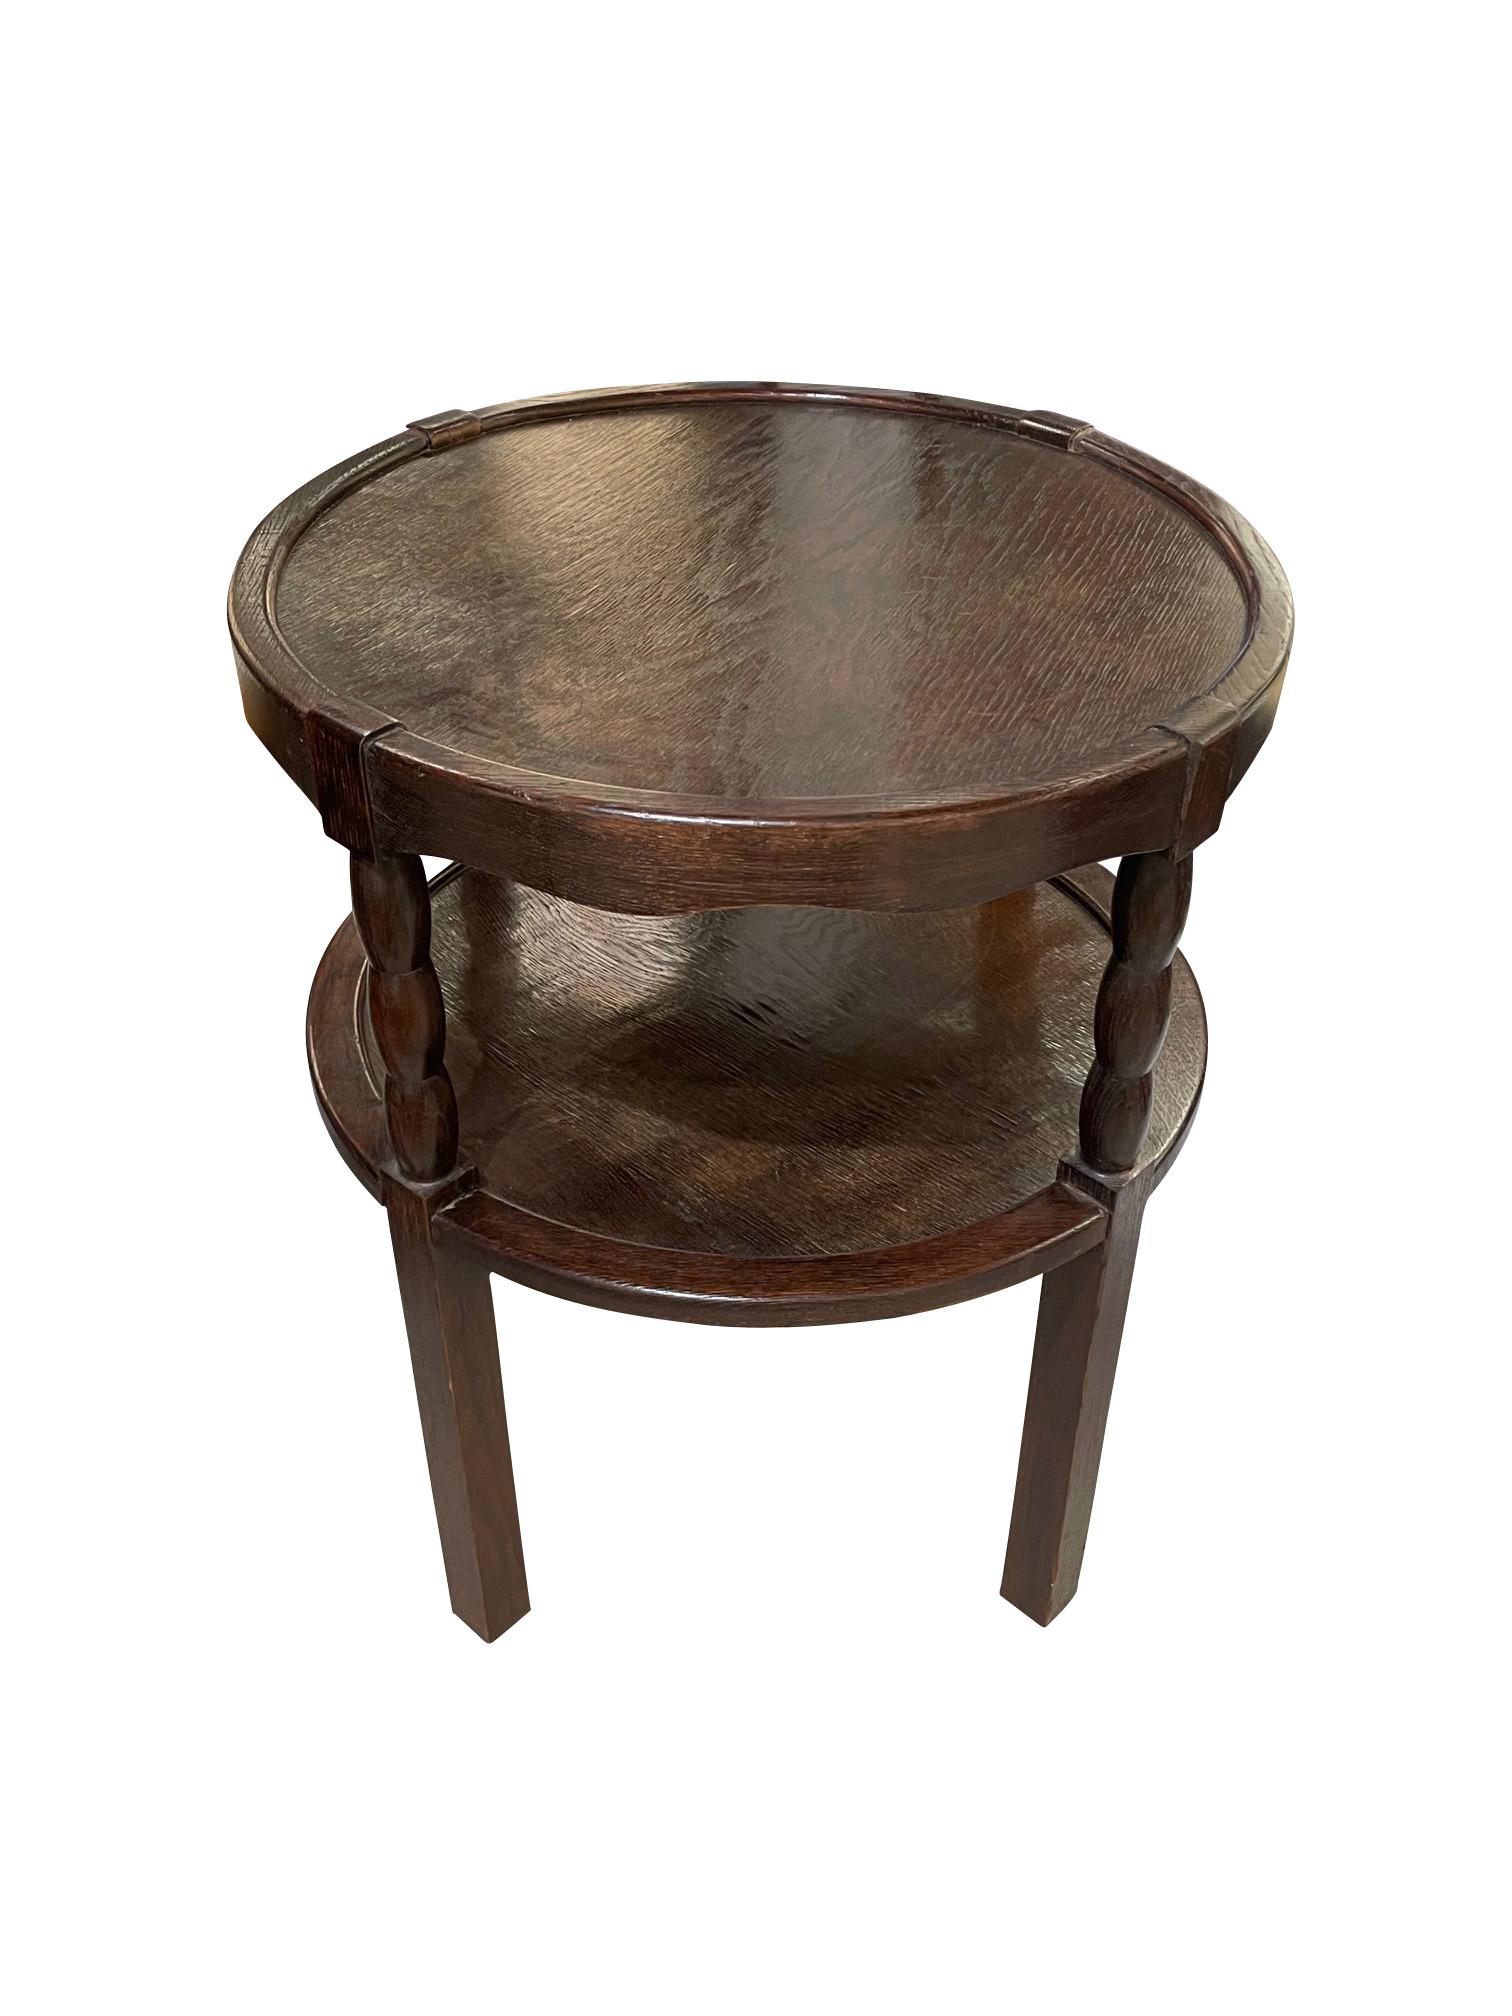 1930's French two tiered round side table.
Lip detail around both surfaces.
Spool design connecting two tiers with square leg bottom.
Polished oak wood.
Recently refurbished.